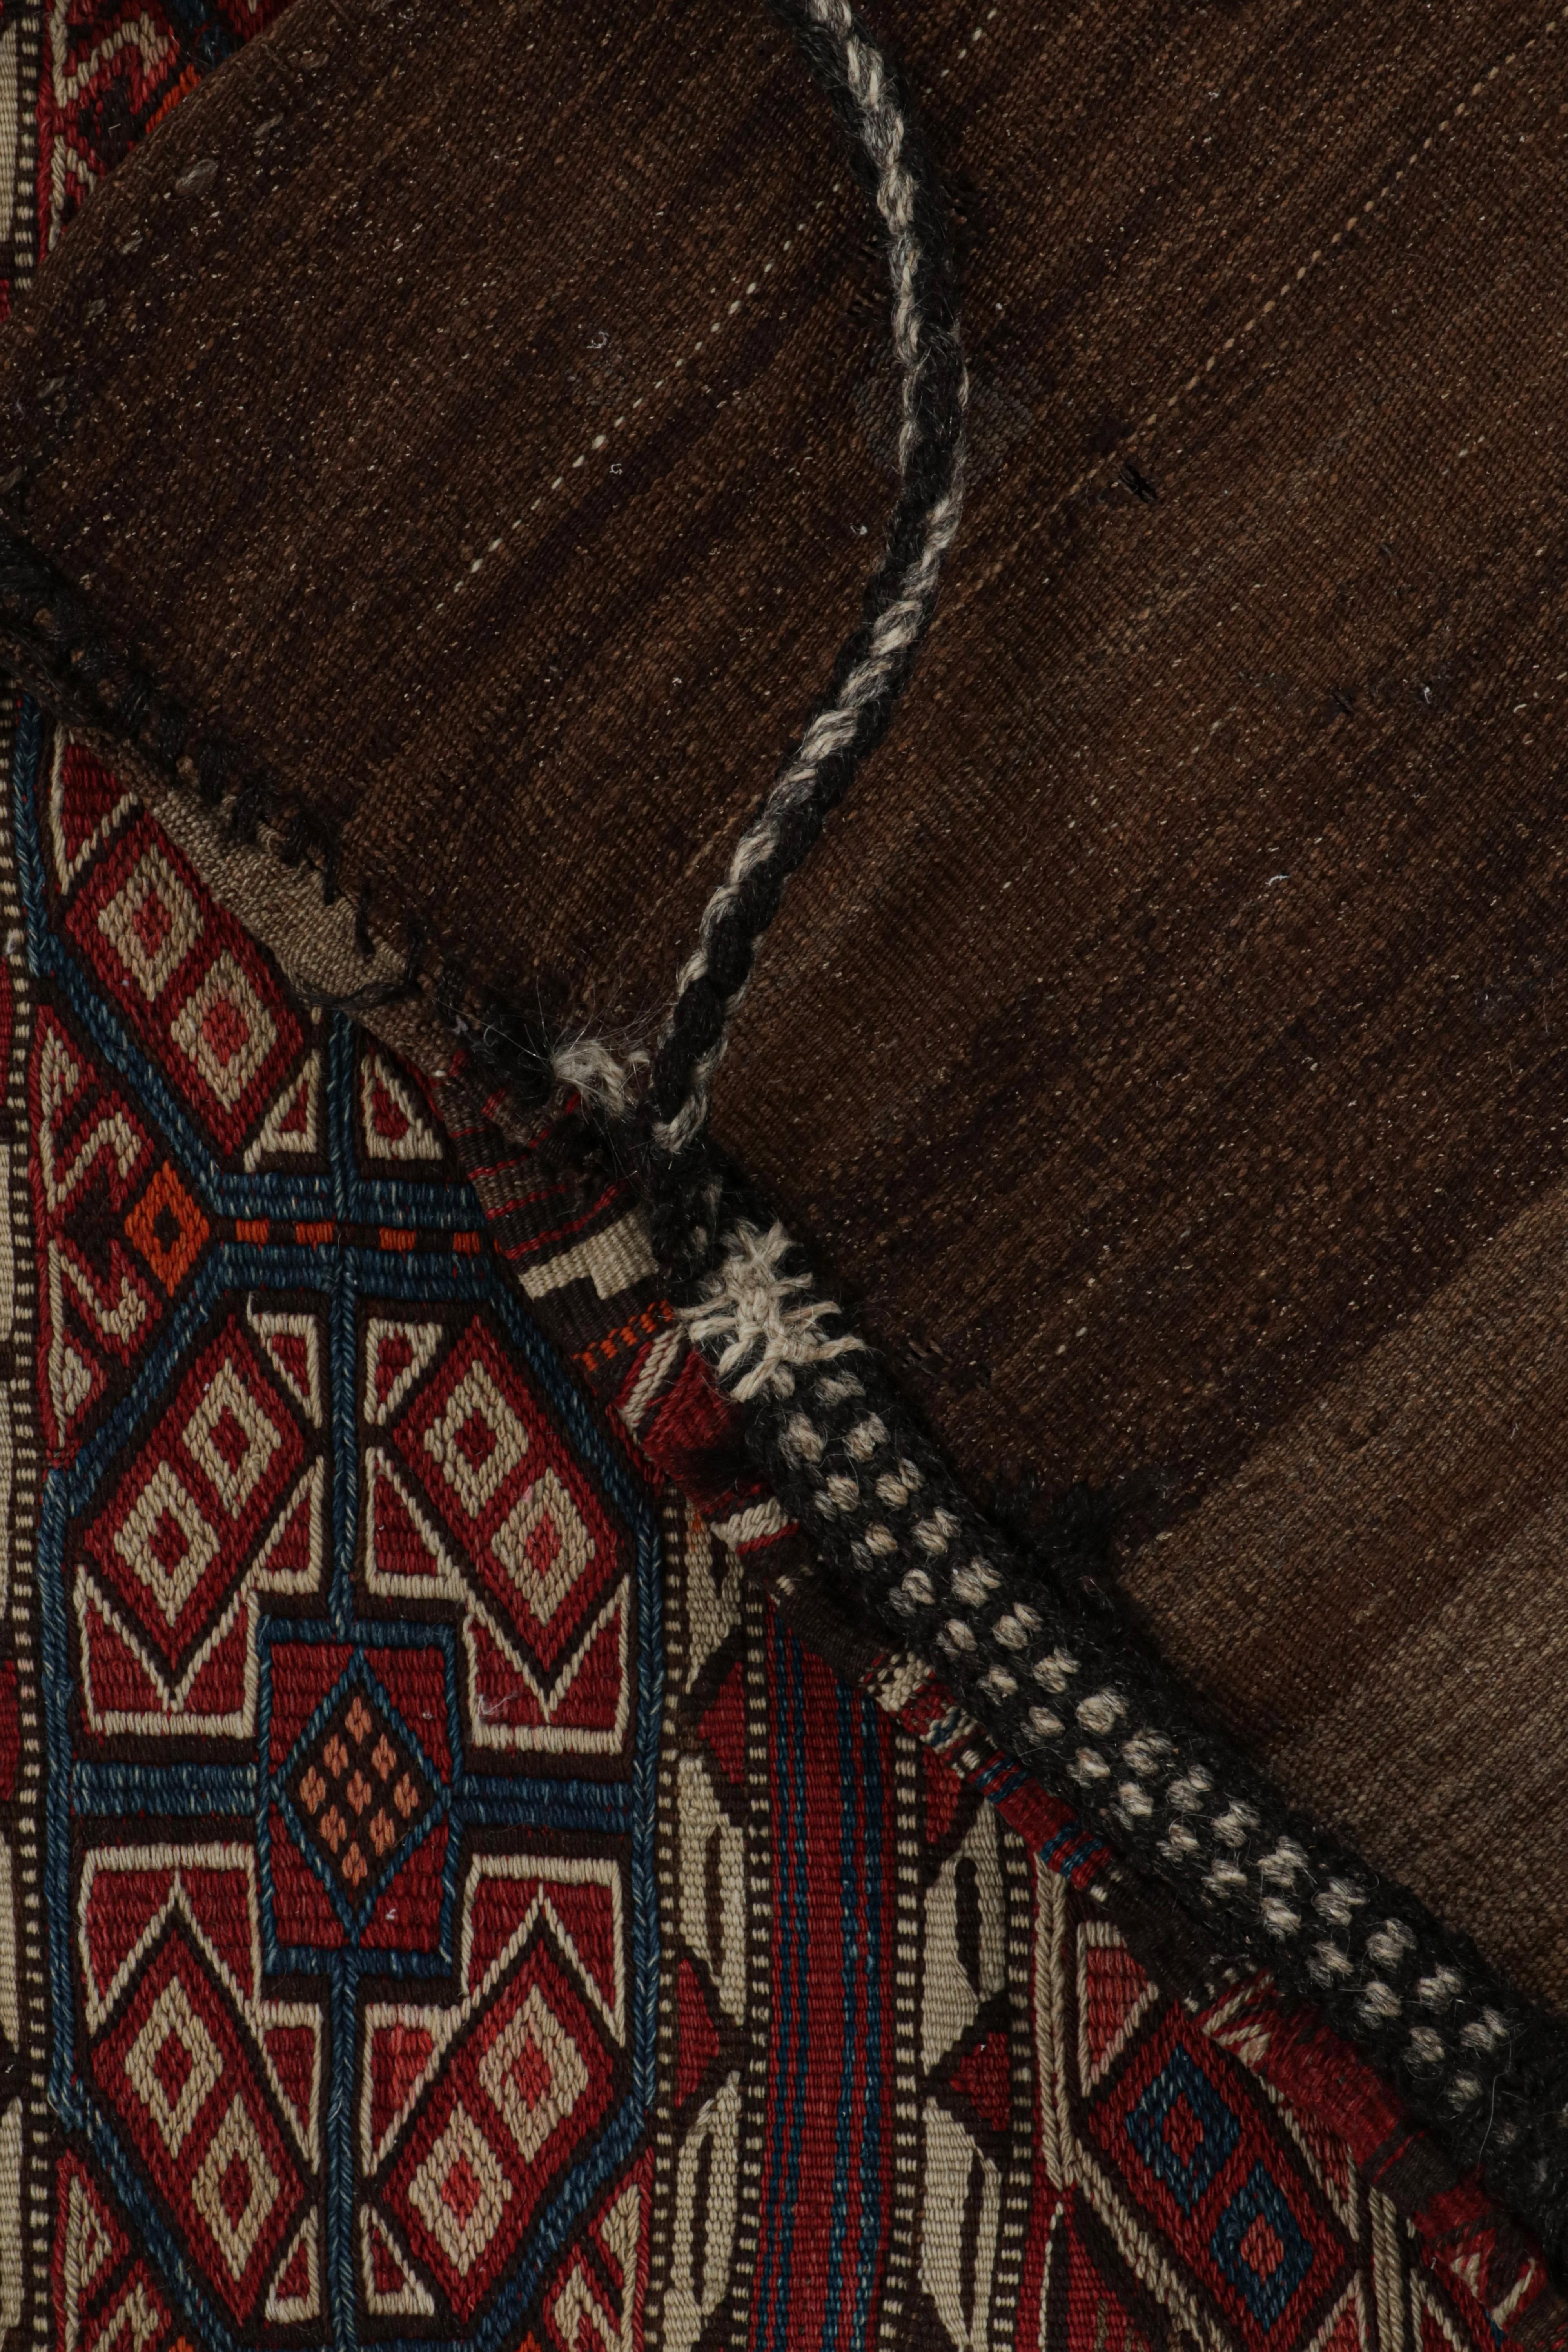 Wool Antique Tribal Bag & Flatweave Textile with Geometric Patterns, from Rug & Kilim For Sale